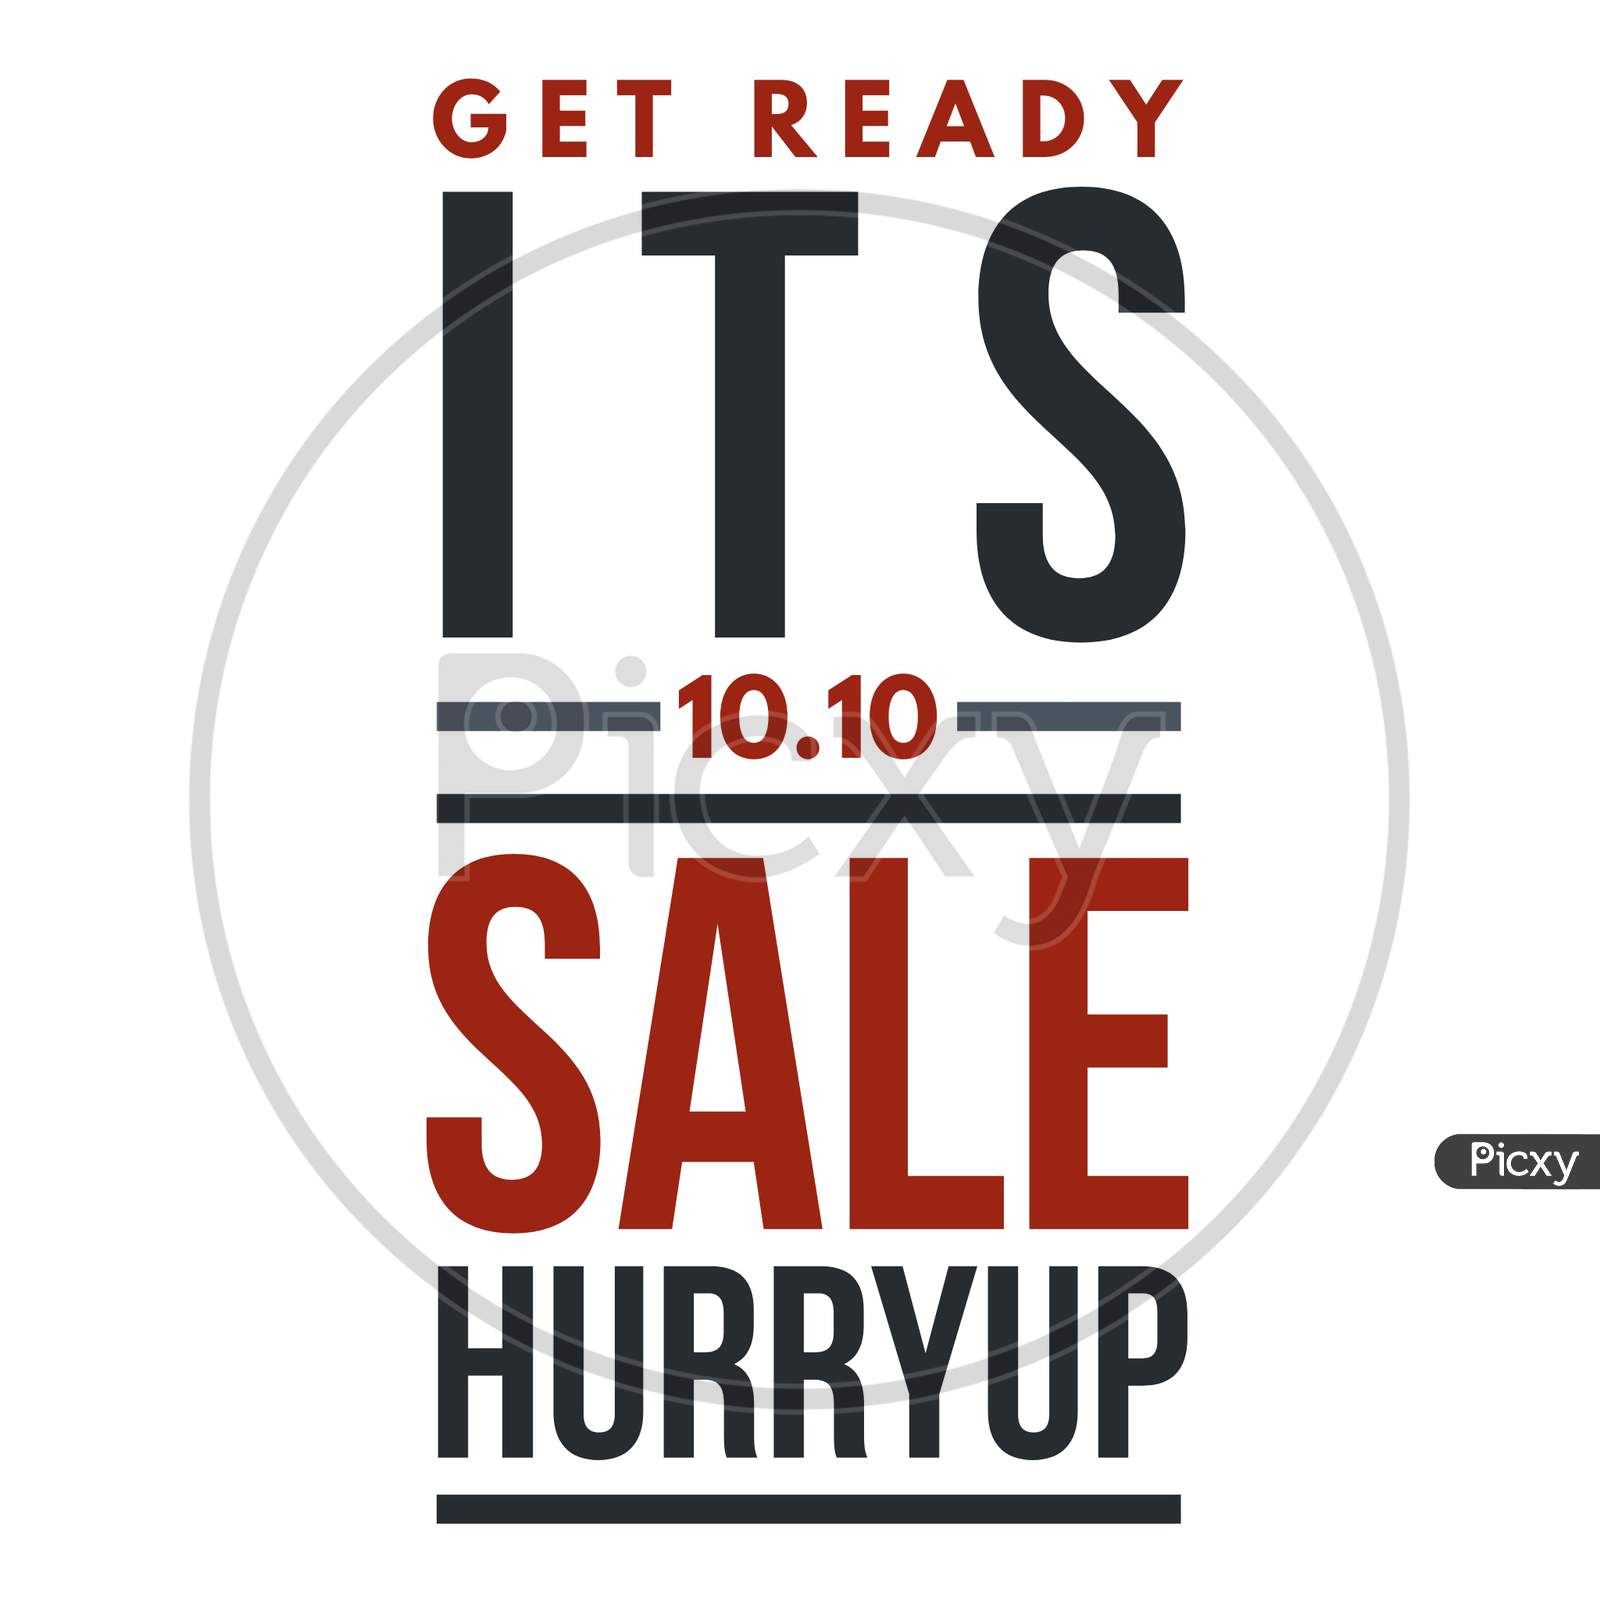 Image With A Text "Get Ready Its 10.10 Sale Hurry Up"